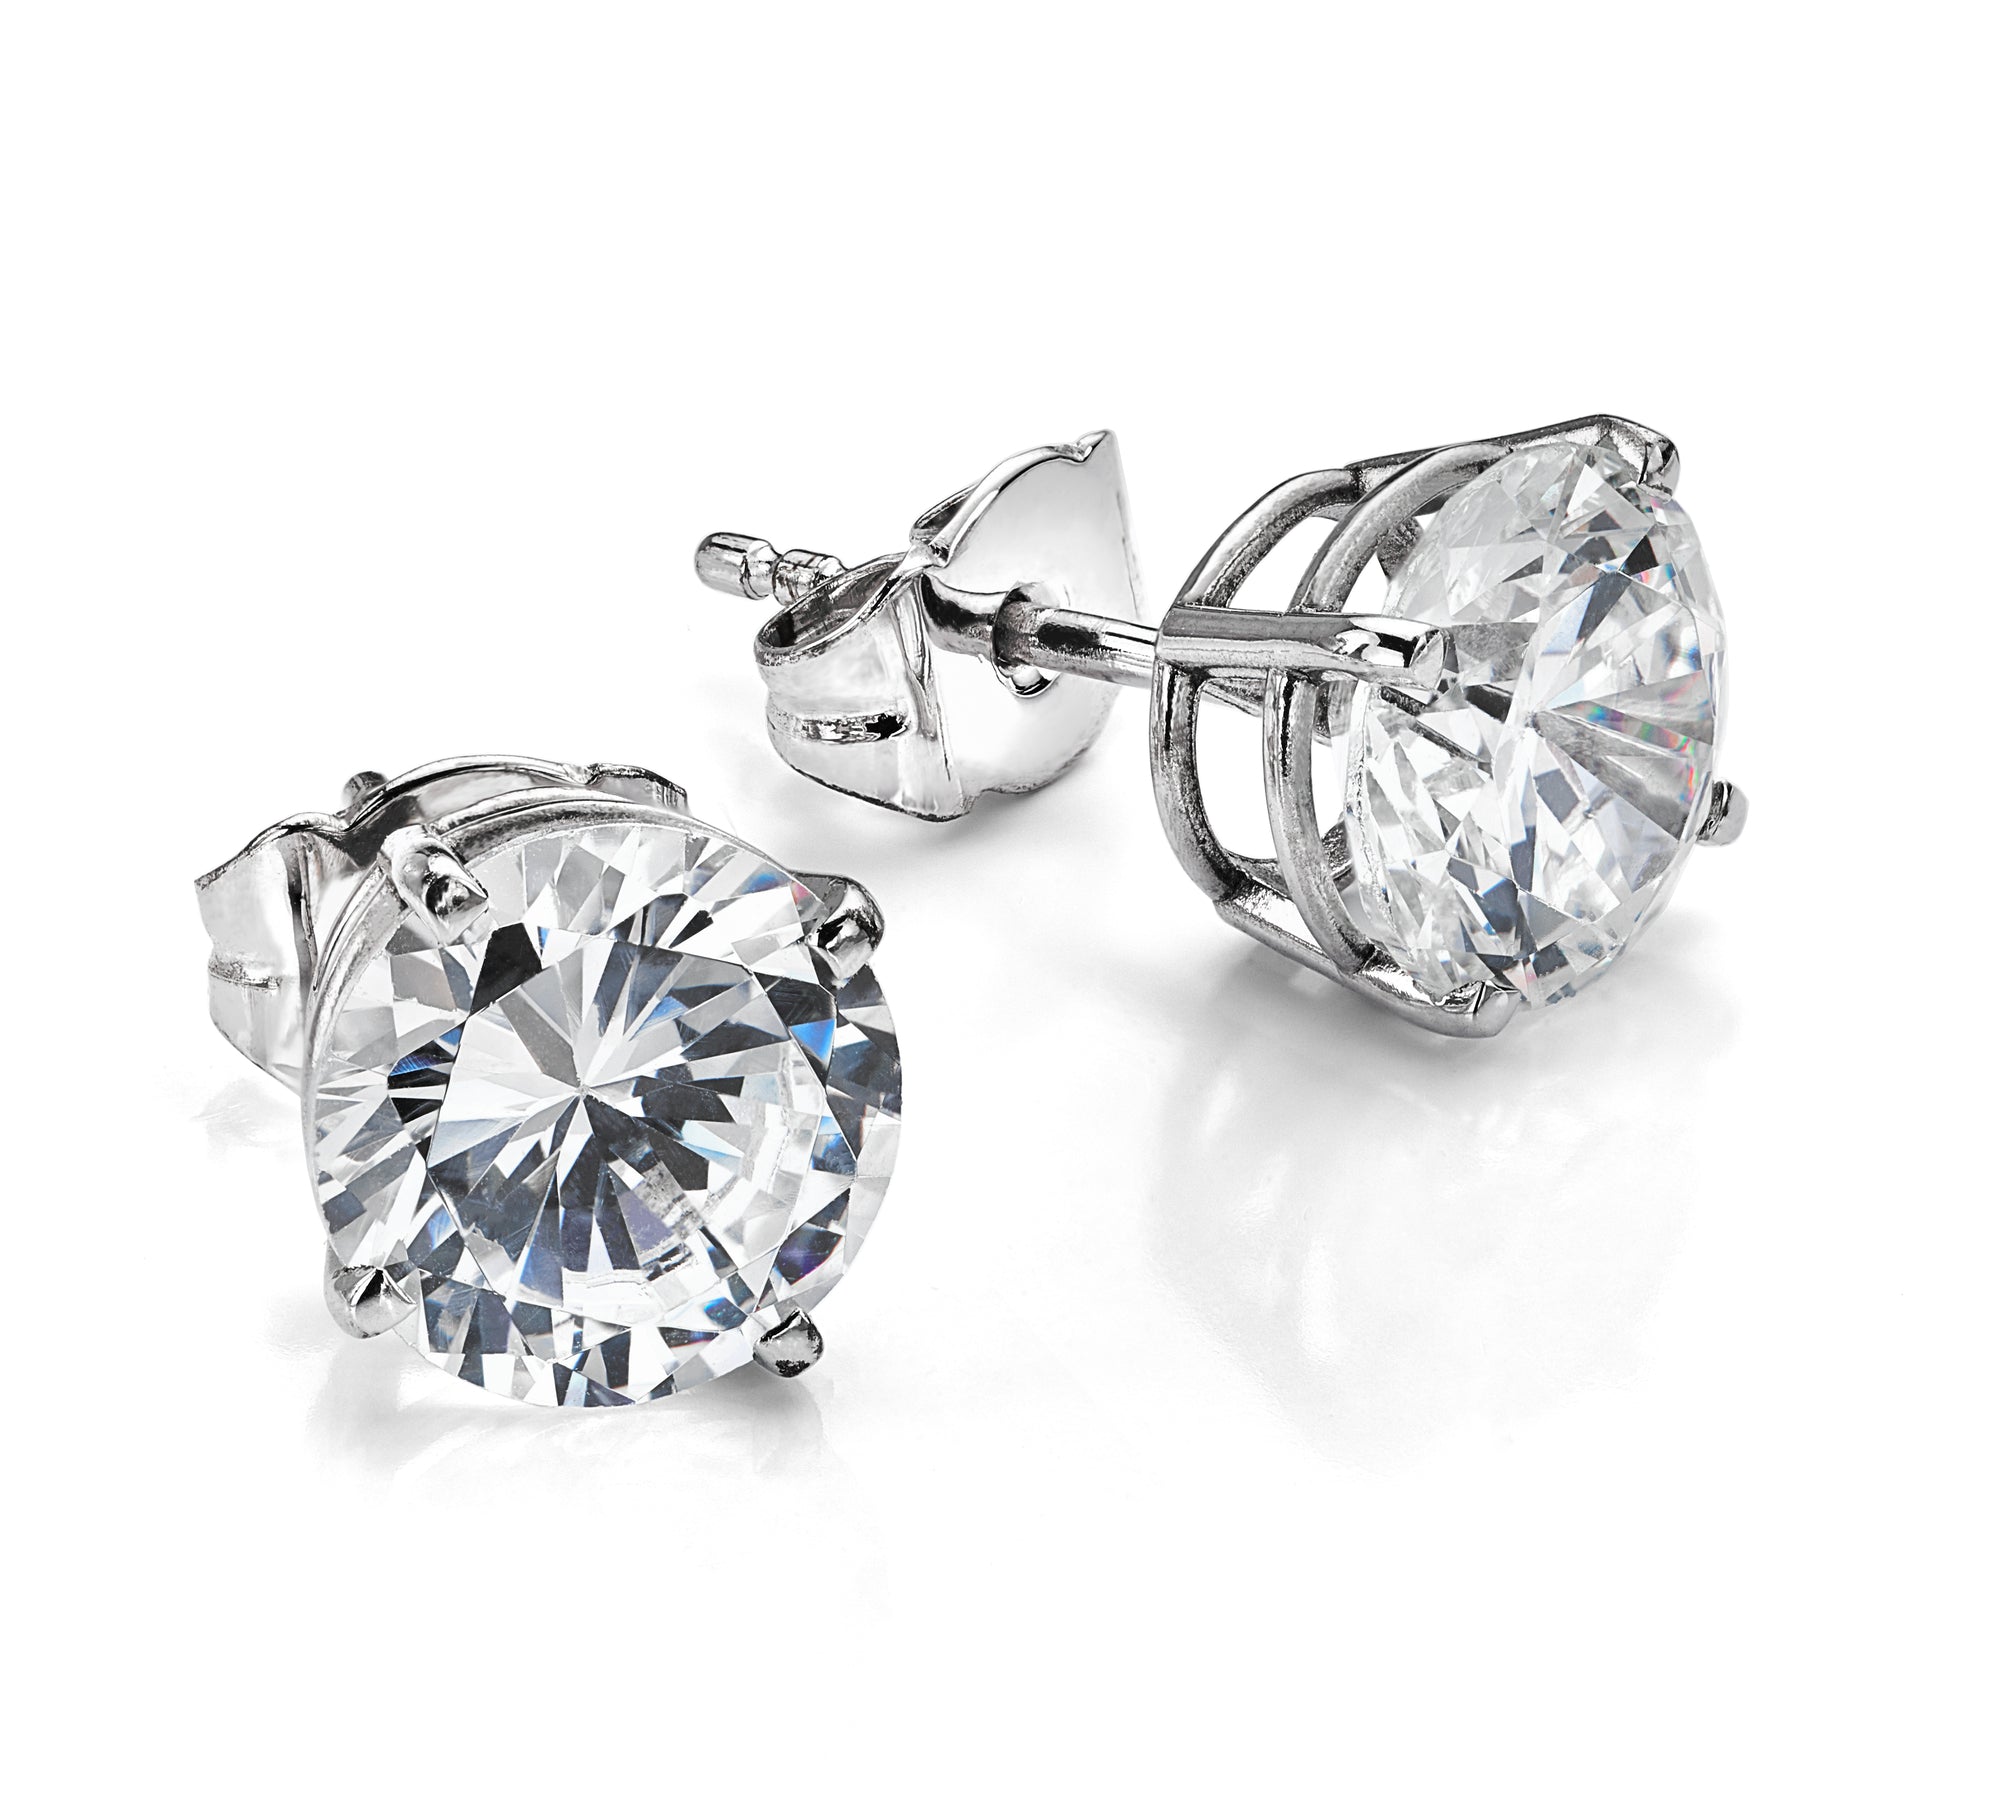 2.02 CT Certified Lab Grown Round Diamond Studs Earrings in 14k White Gold E VS2